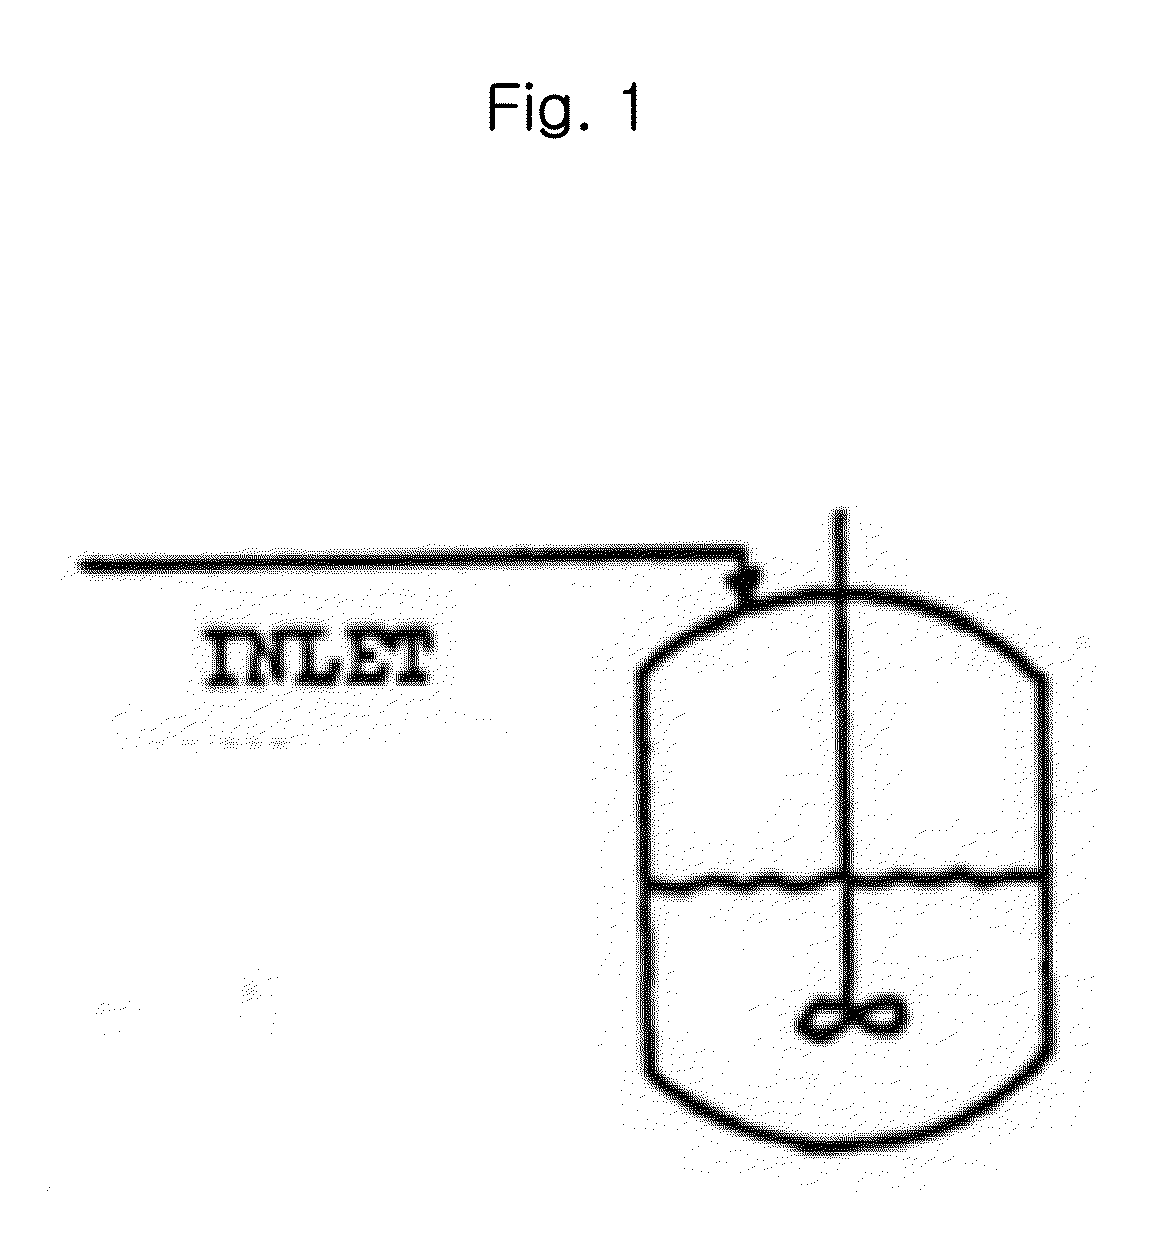 Method for preparing positive electrode active material precursor and positive electrode material for lithium secondary battery having concentration-gradient layer using batch reactor, and positive electrode active material precursor and positive electrode material for lithium secondary battery prepared by the method